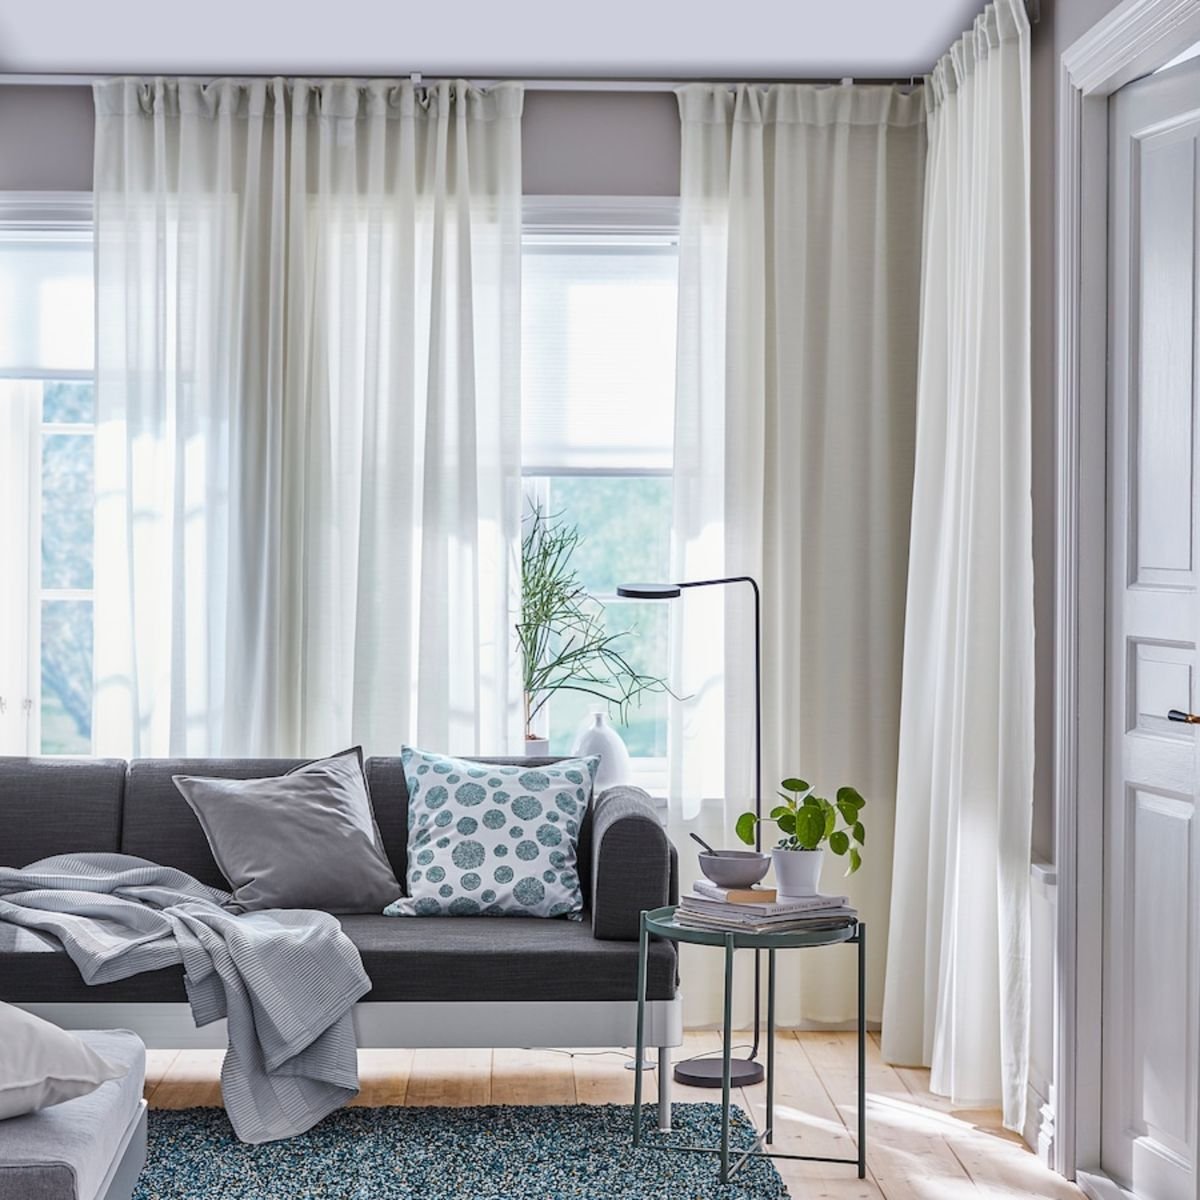 5 IKEA buys every small home needs to create the illusion of more space